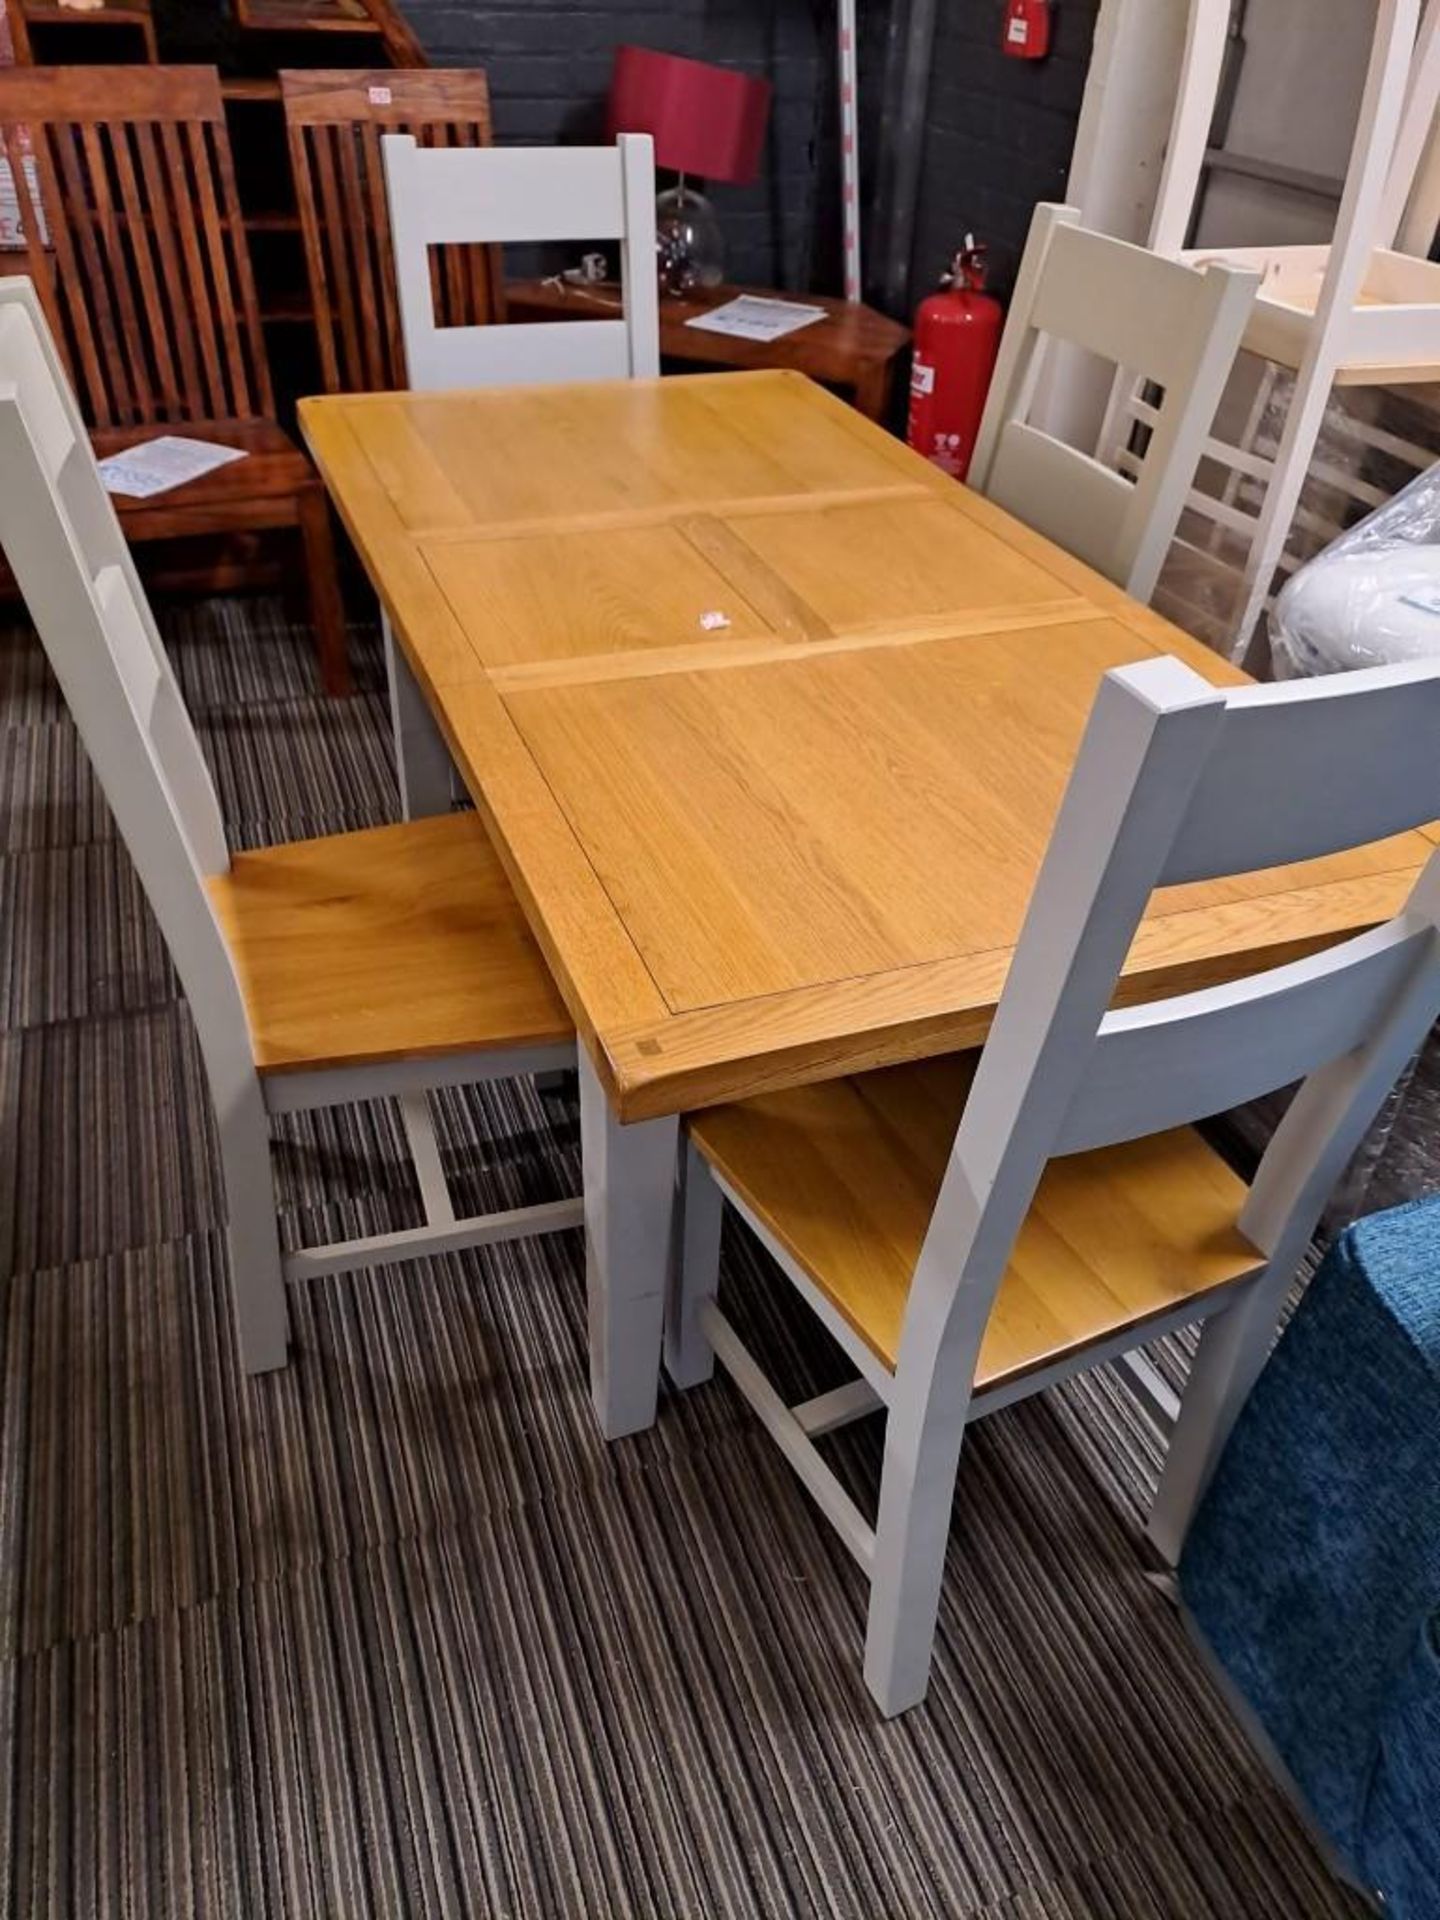 *EX DISPLAY* IFD Melbourne oak extending dining table with flip over centre leaf with 4 chairs. - Image 2 of 2